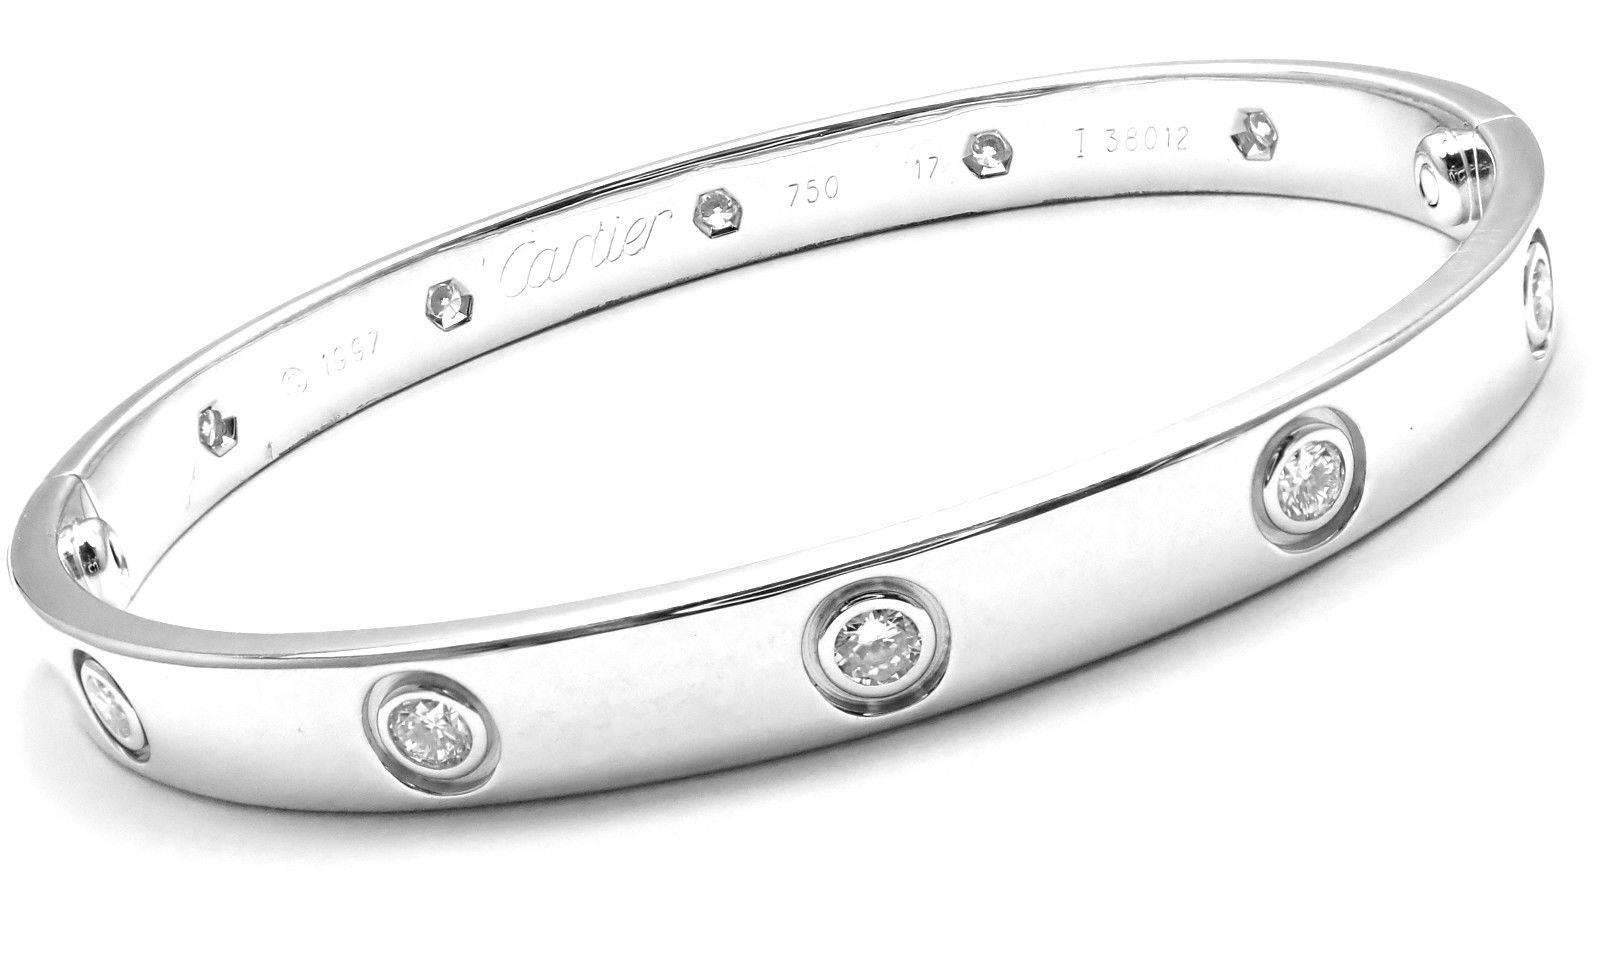 18k White Gold 10 Diamond Cartier LOVE Bangle Bracelet, size 17.
With 10 brilliant round cut diamonds, VS1 clarity, E-F color total weight approx. .50ct
This bracelet comes with a Cartier box, screwdriver and a Cartier certificate.
Details:
Size: